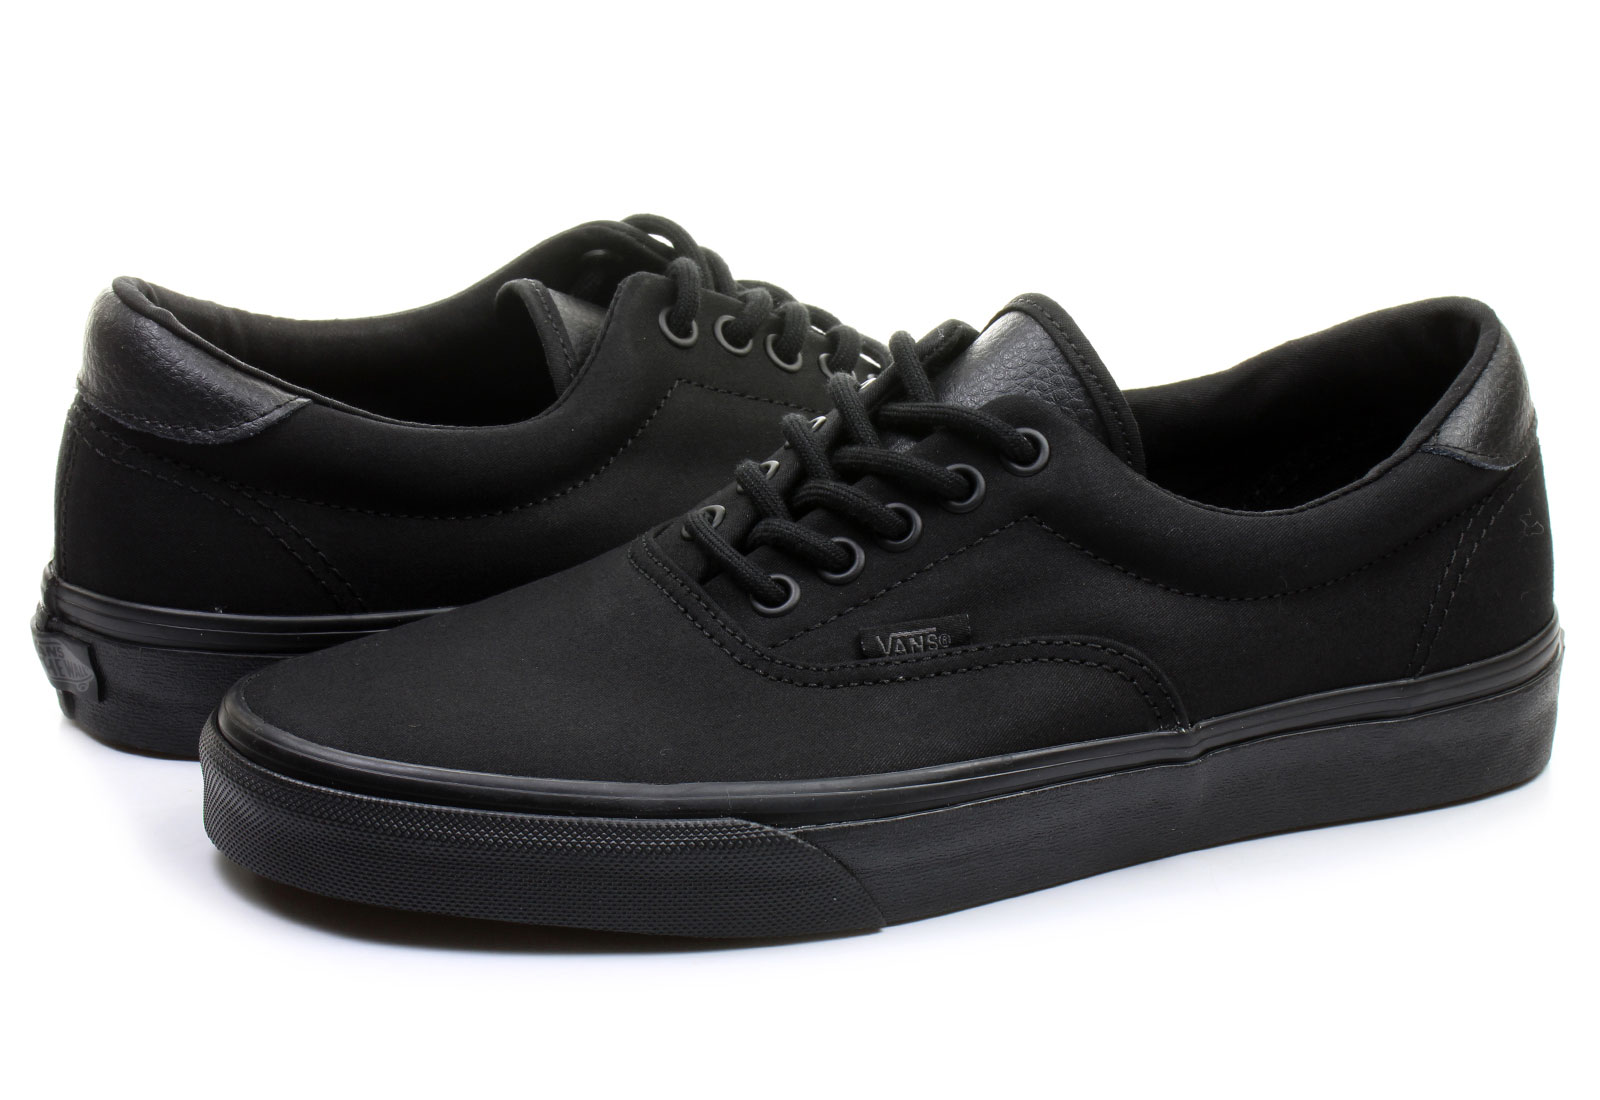 Vans Sneakers - Era 59 - V3S4IT7 - Online shop for sneakers, shoes and boots